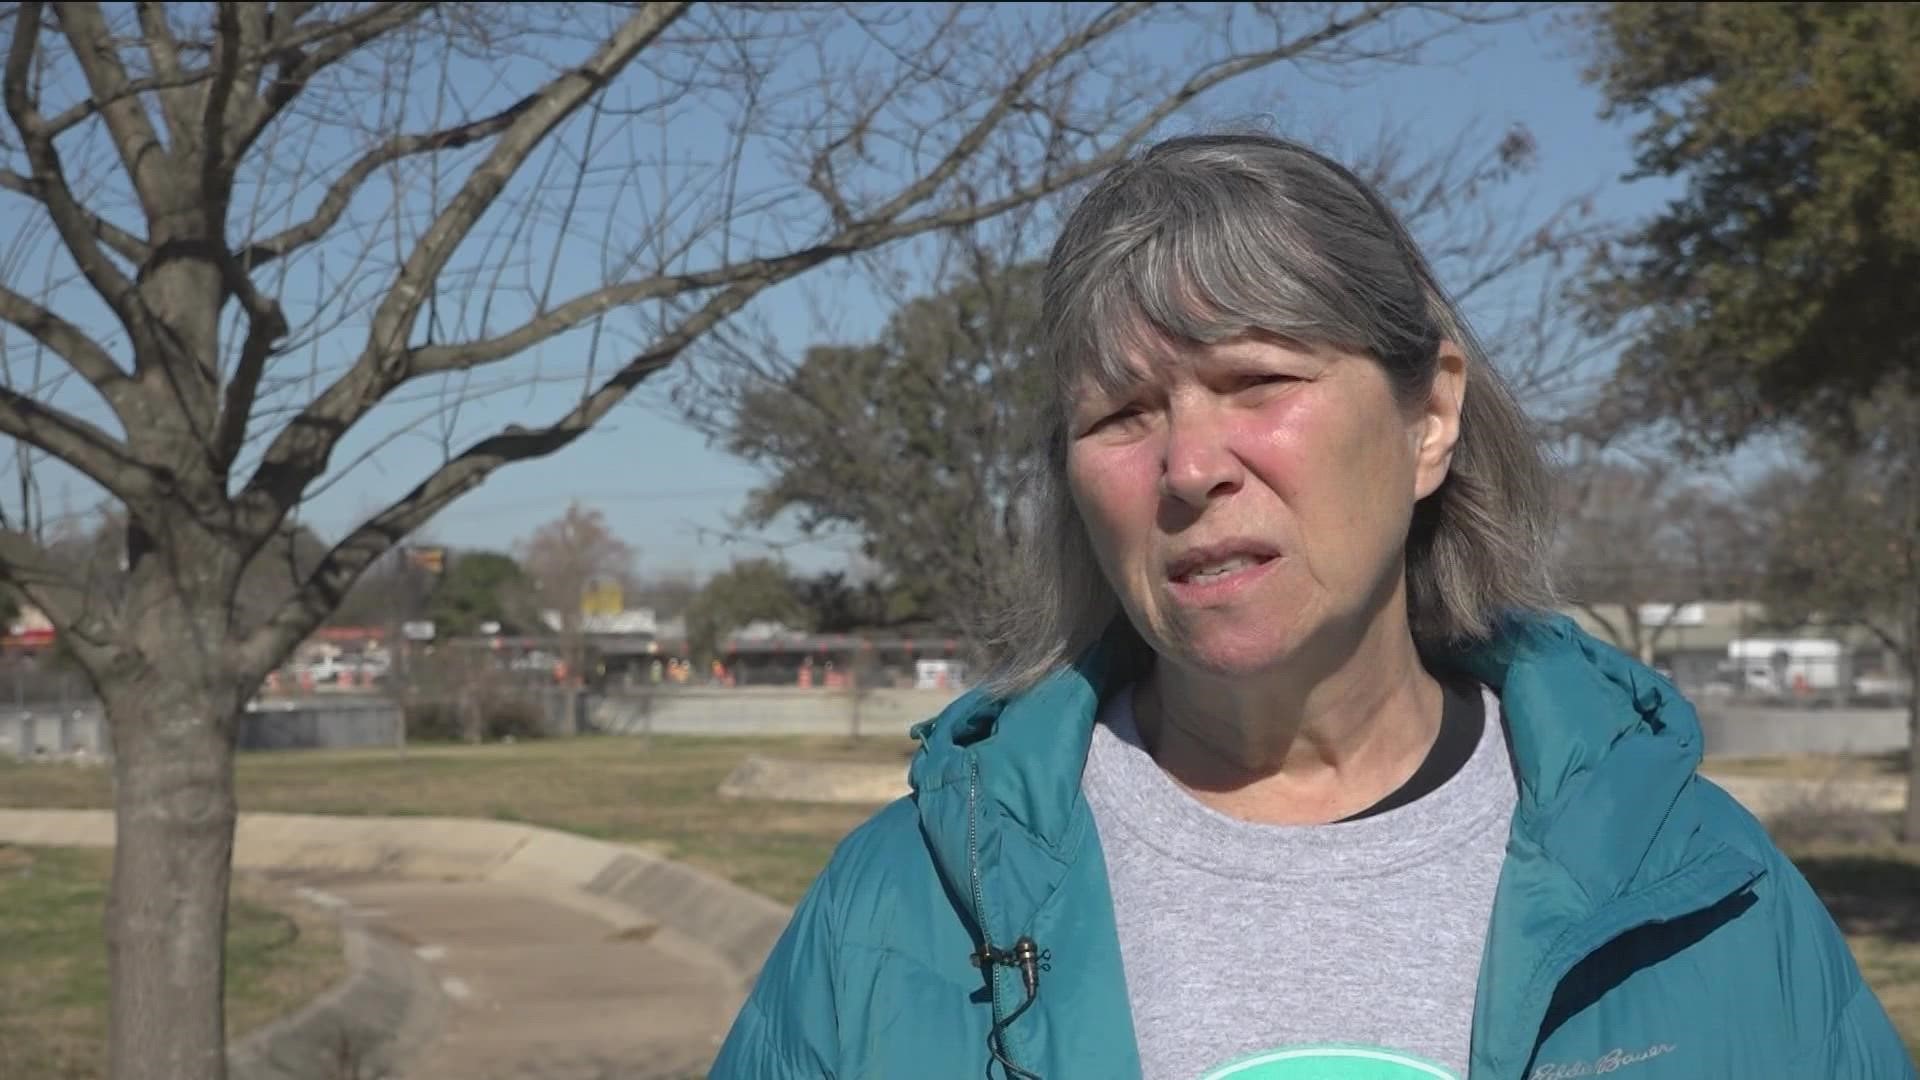 This week, homeless coalitions across Central Texas are working with volunteers for the point-in-time homeless count.